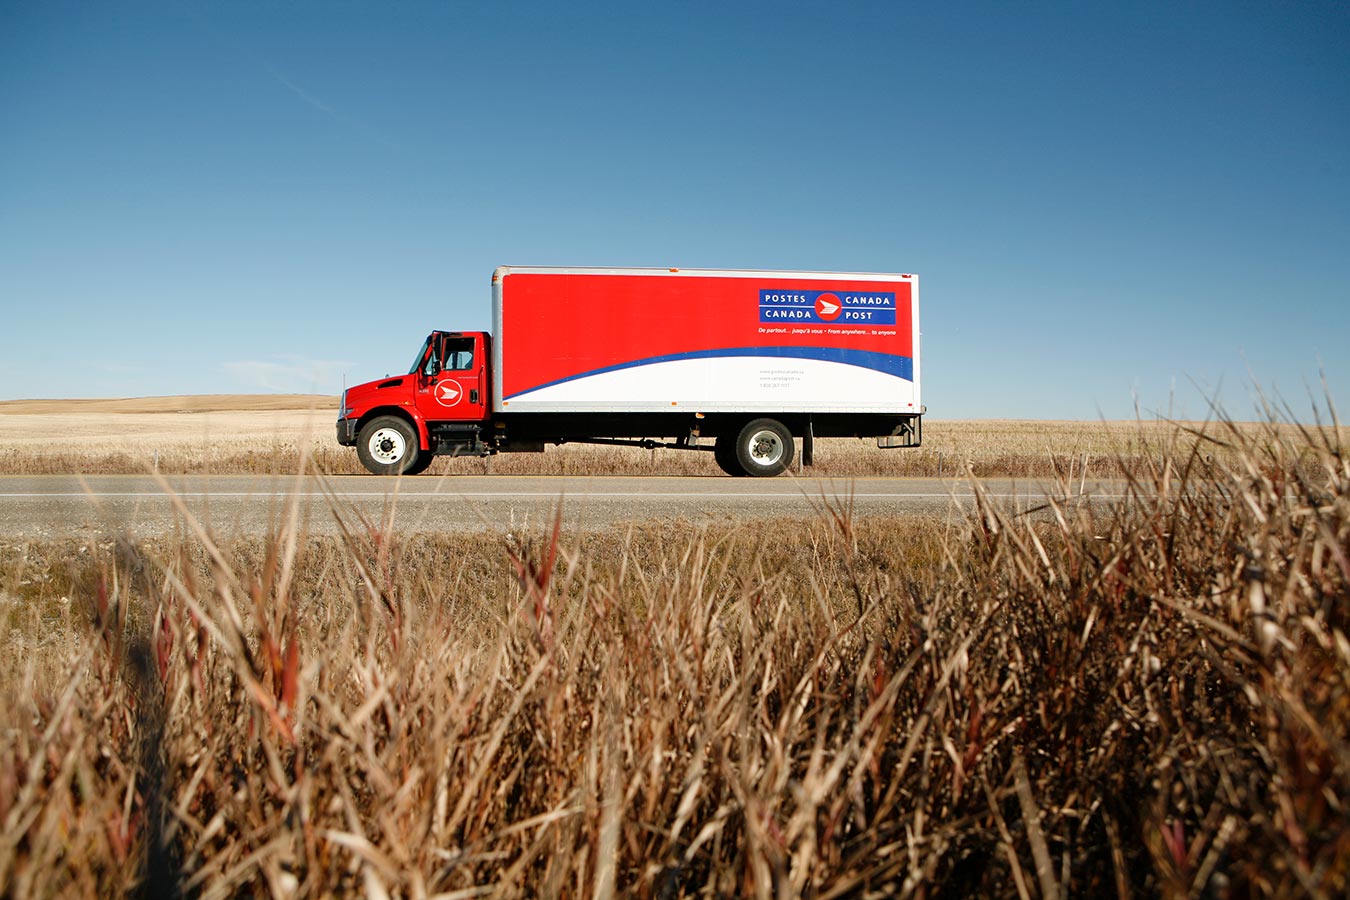 Canada Post delivery truck driving through the prairies under a clear and bright sky